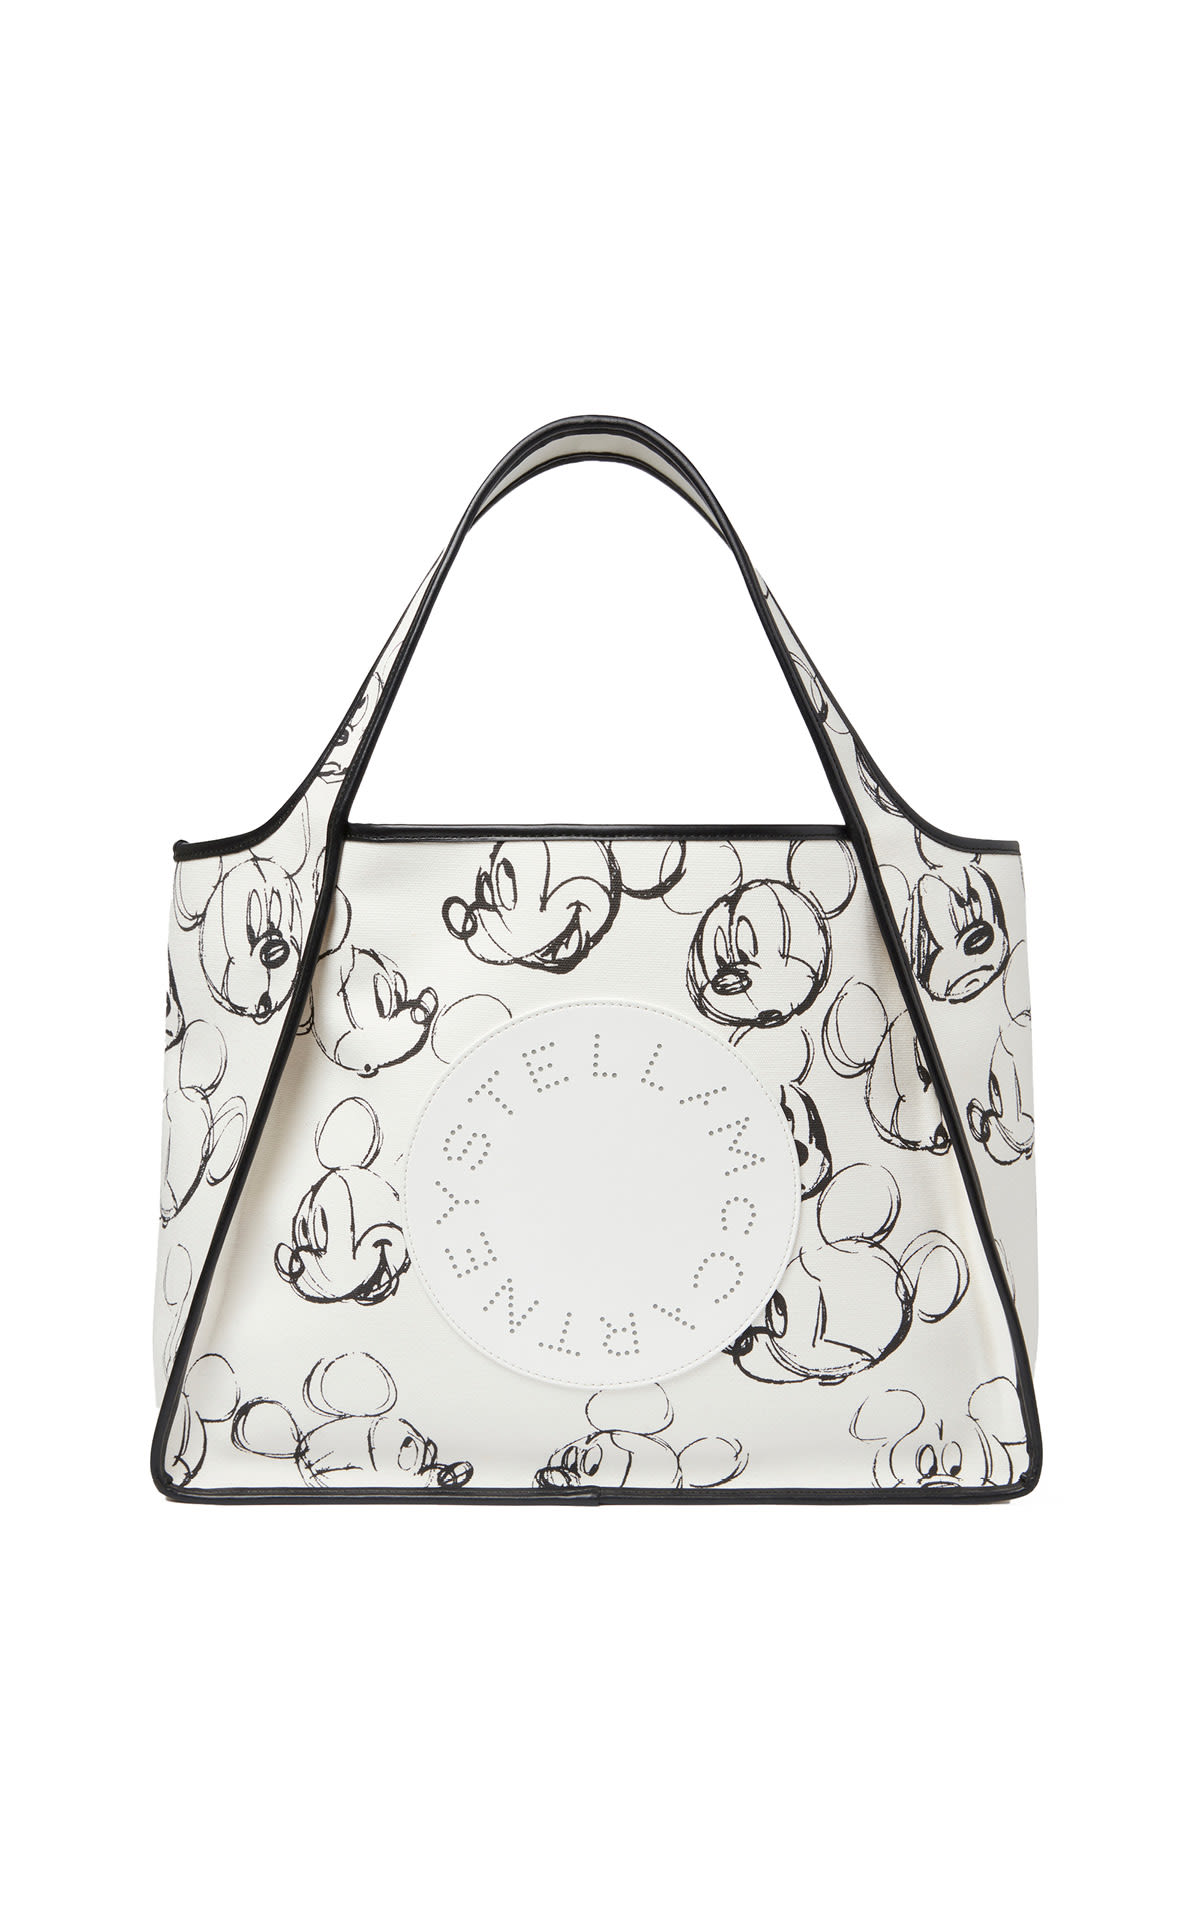 Tote bag with print for Disney Fantasia of Mickey Mouse Stella McCartney